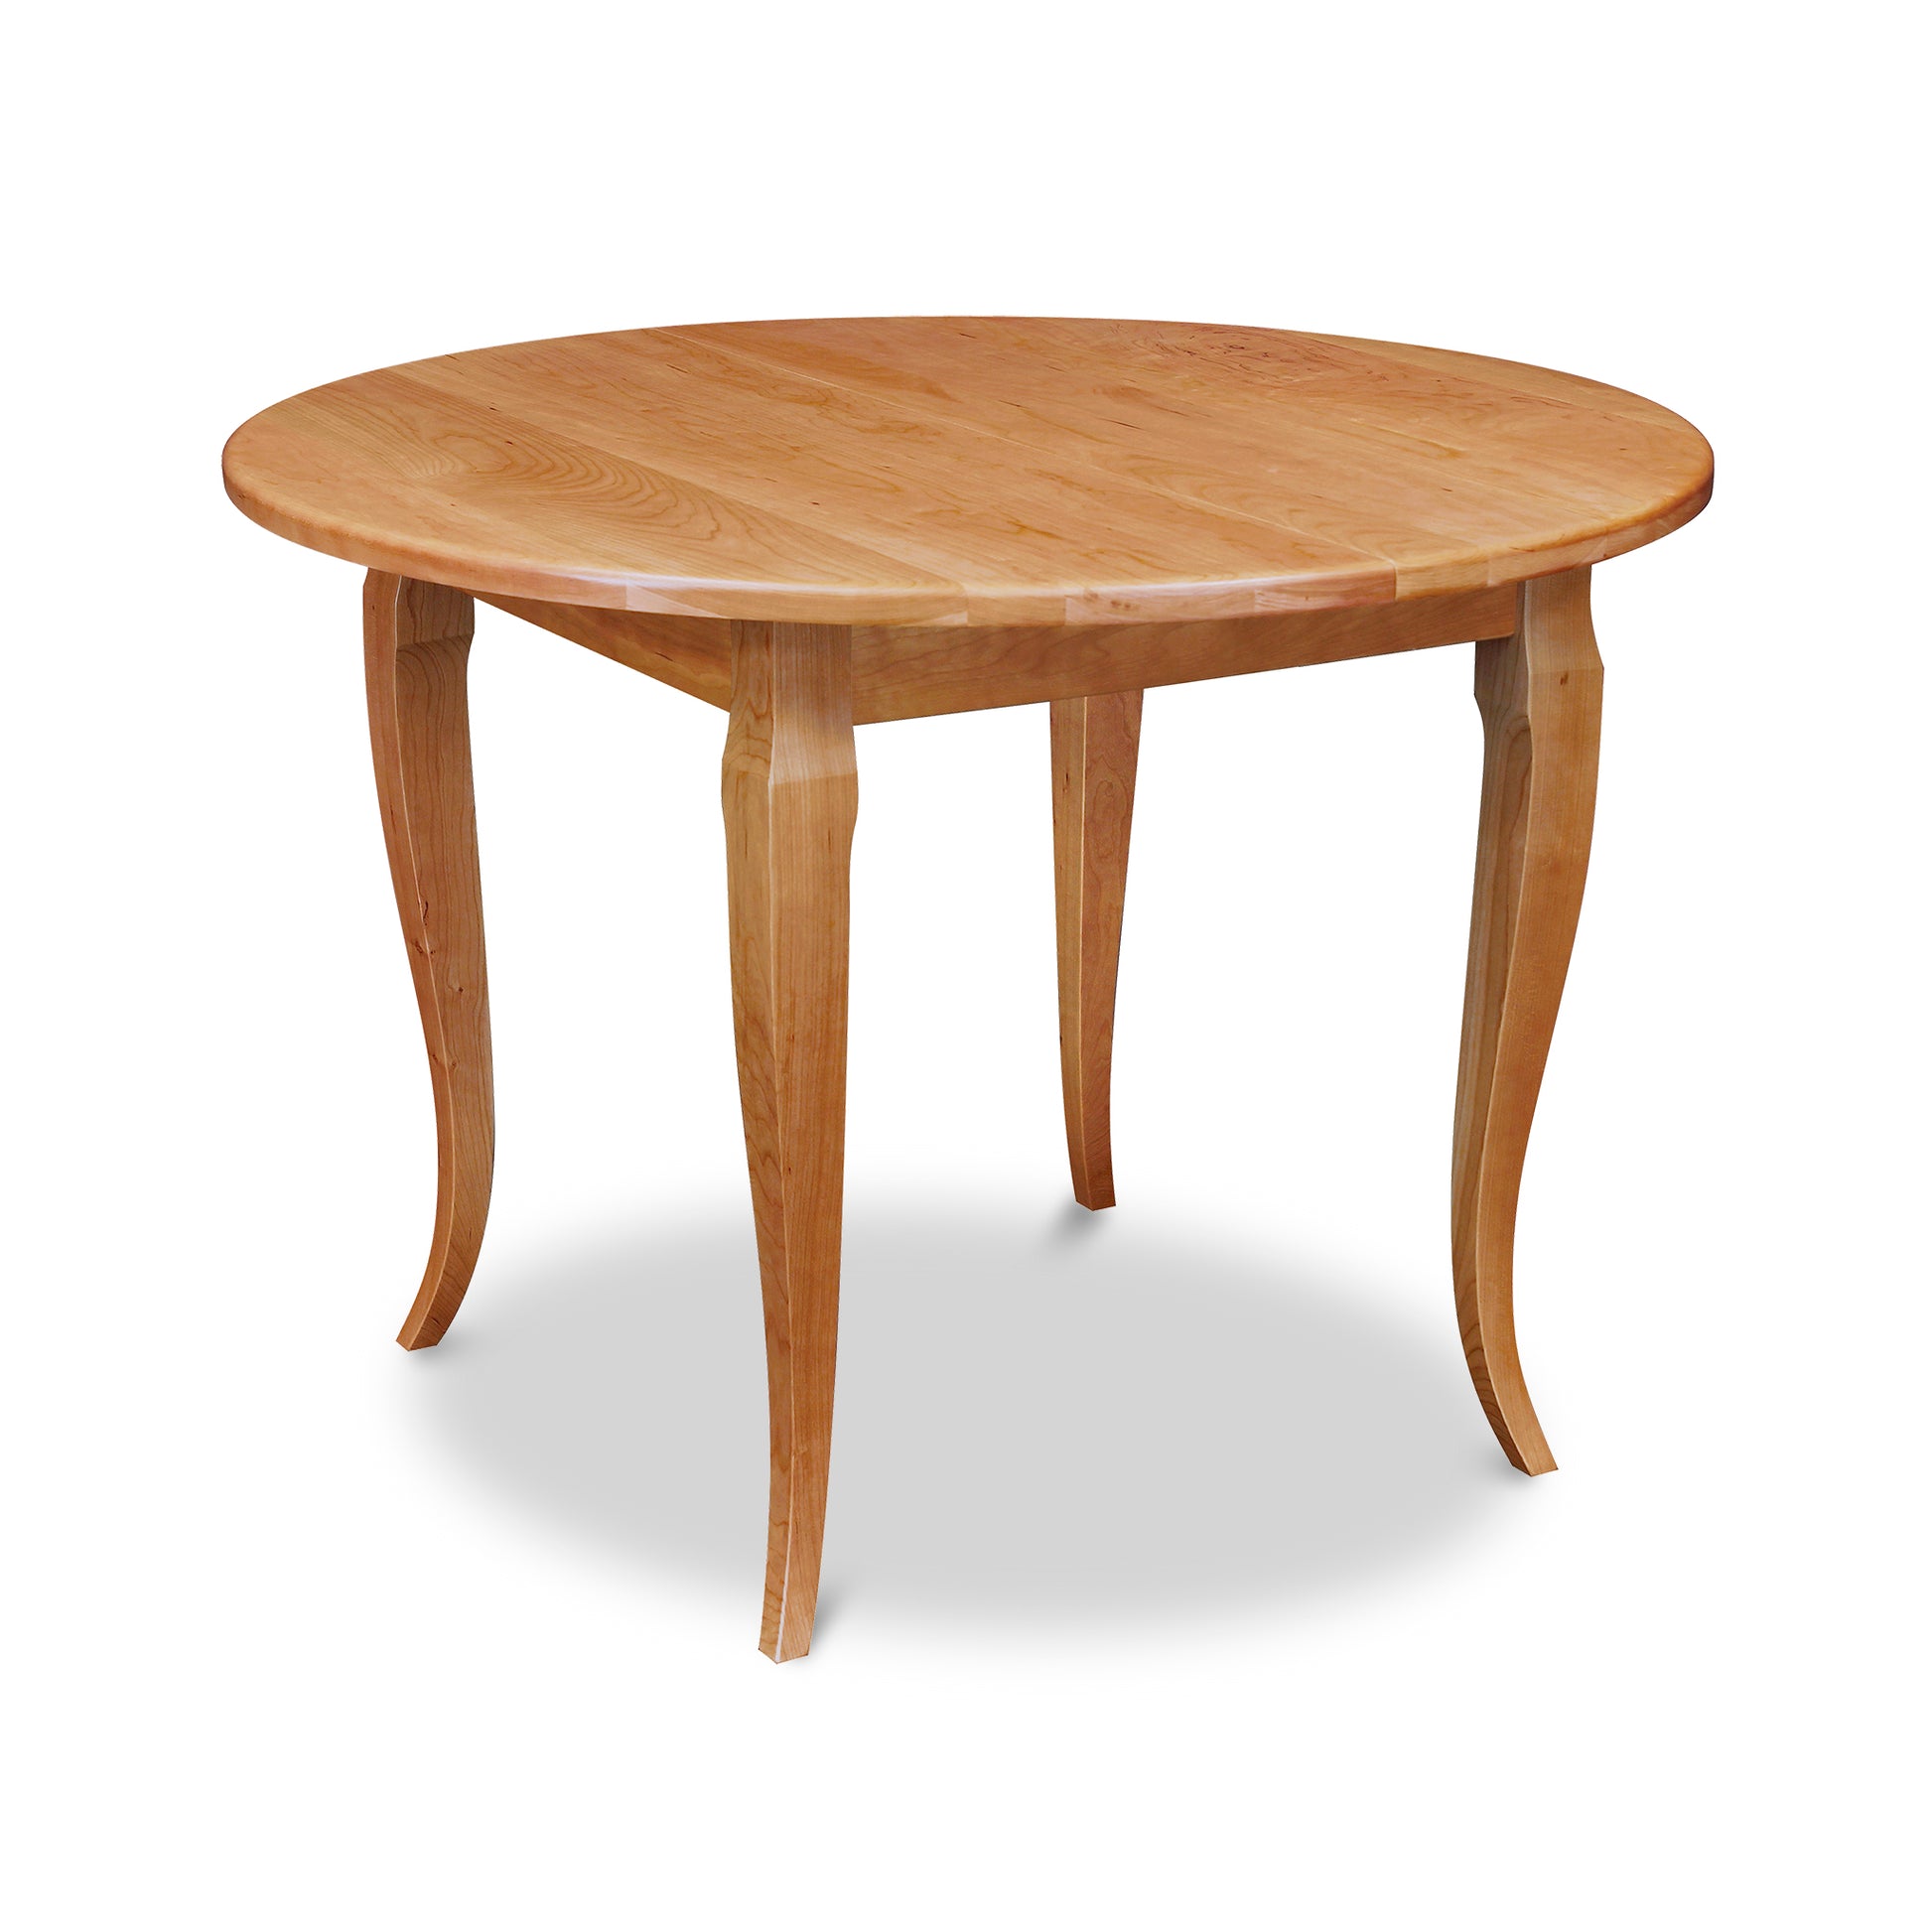 A French Country Round Solid Top Table with eco-friendly legs by Lyndon Furniture.